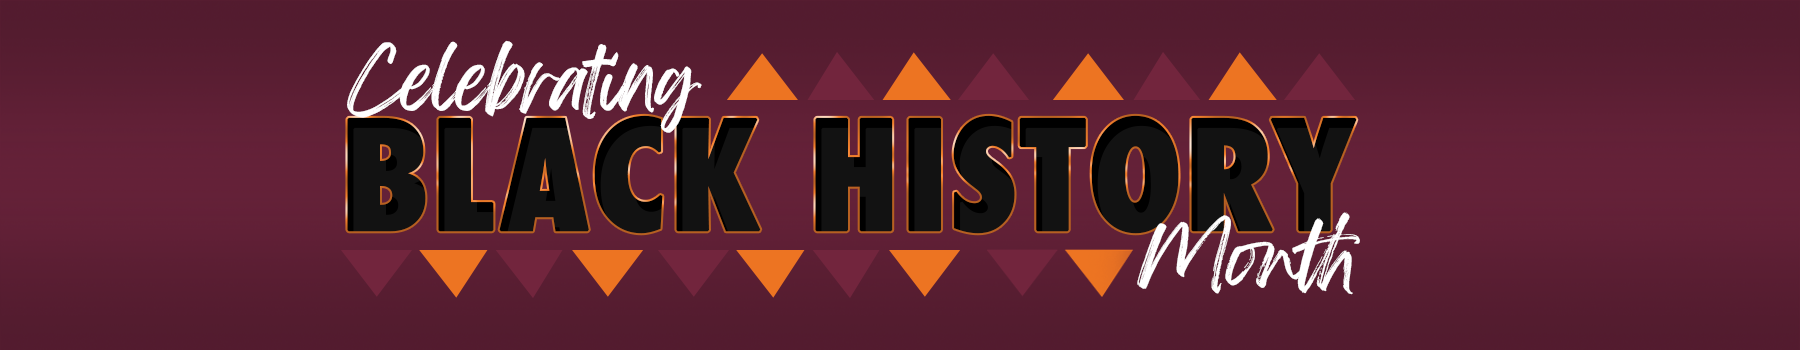 Black-History-Month-page-banner-